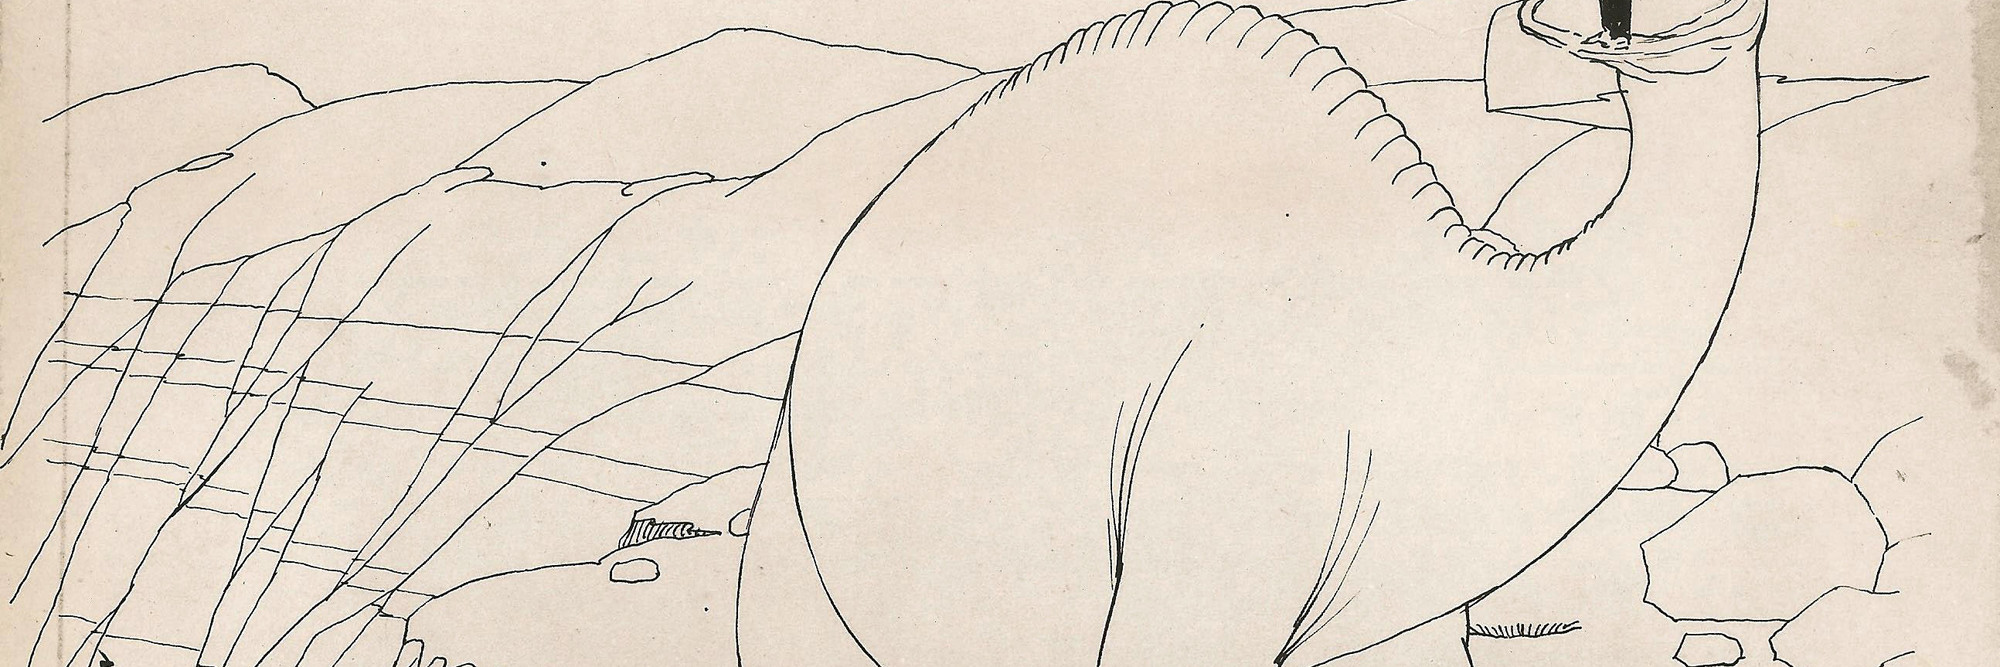 Original animation drawing for Gertie the Dinosaur. USA. 1914. Directed by Winsor McCay. Courtesy John Canemaker